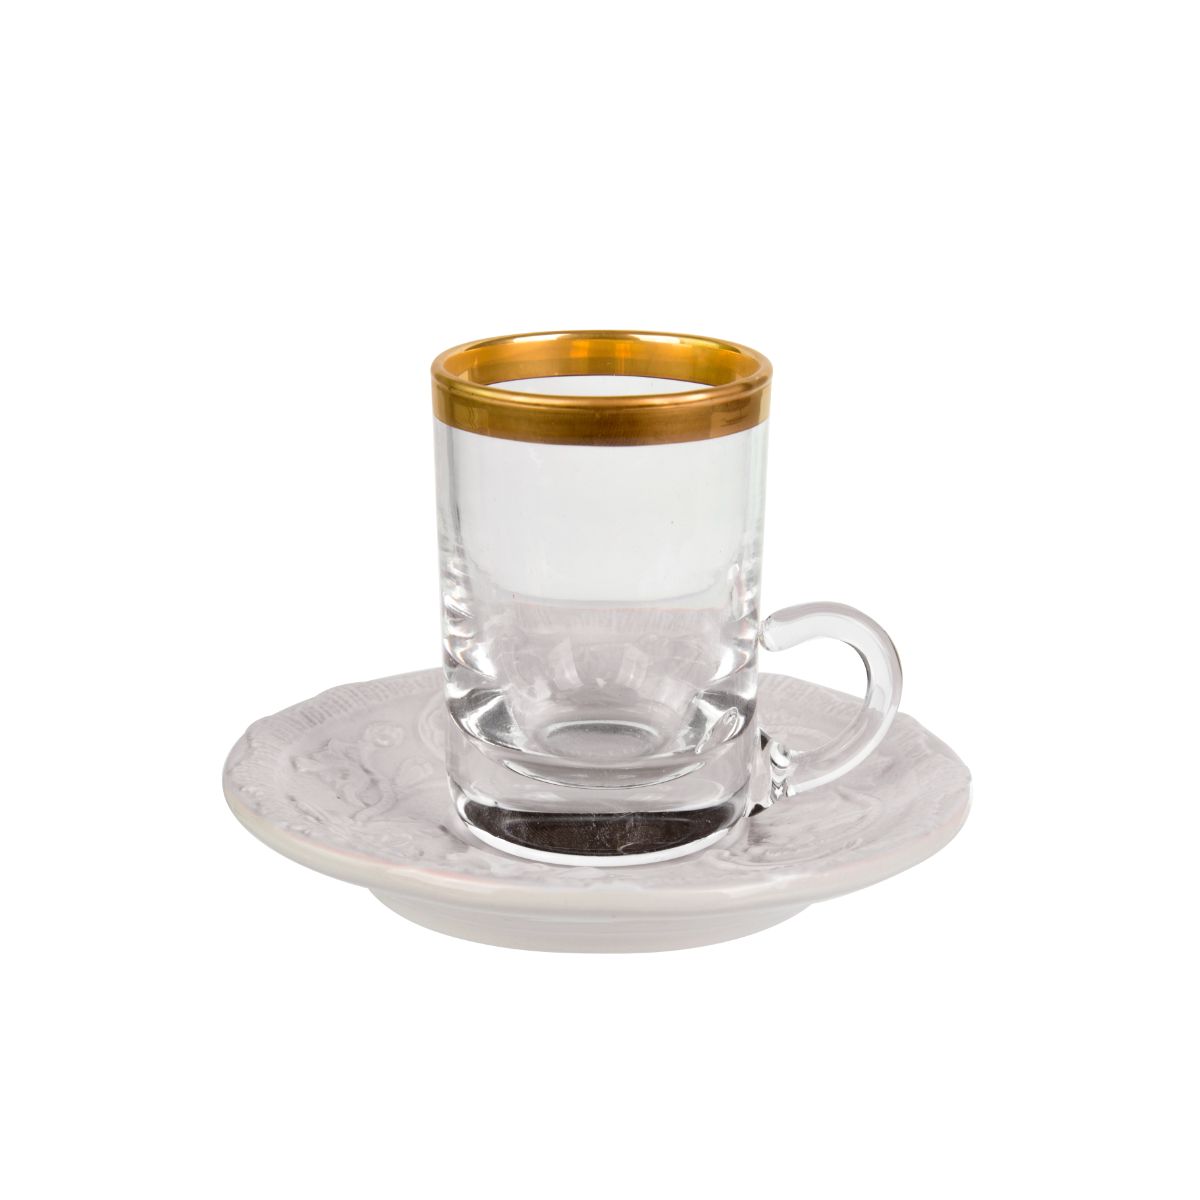 Taormina White & Gold Arabic Tea Cup And Saucer Small Size